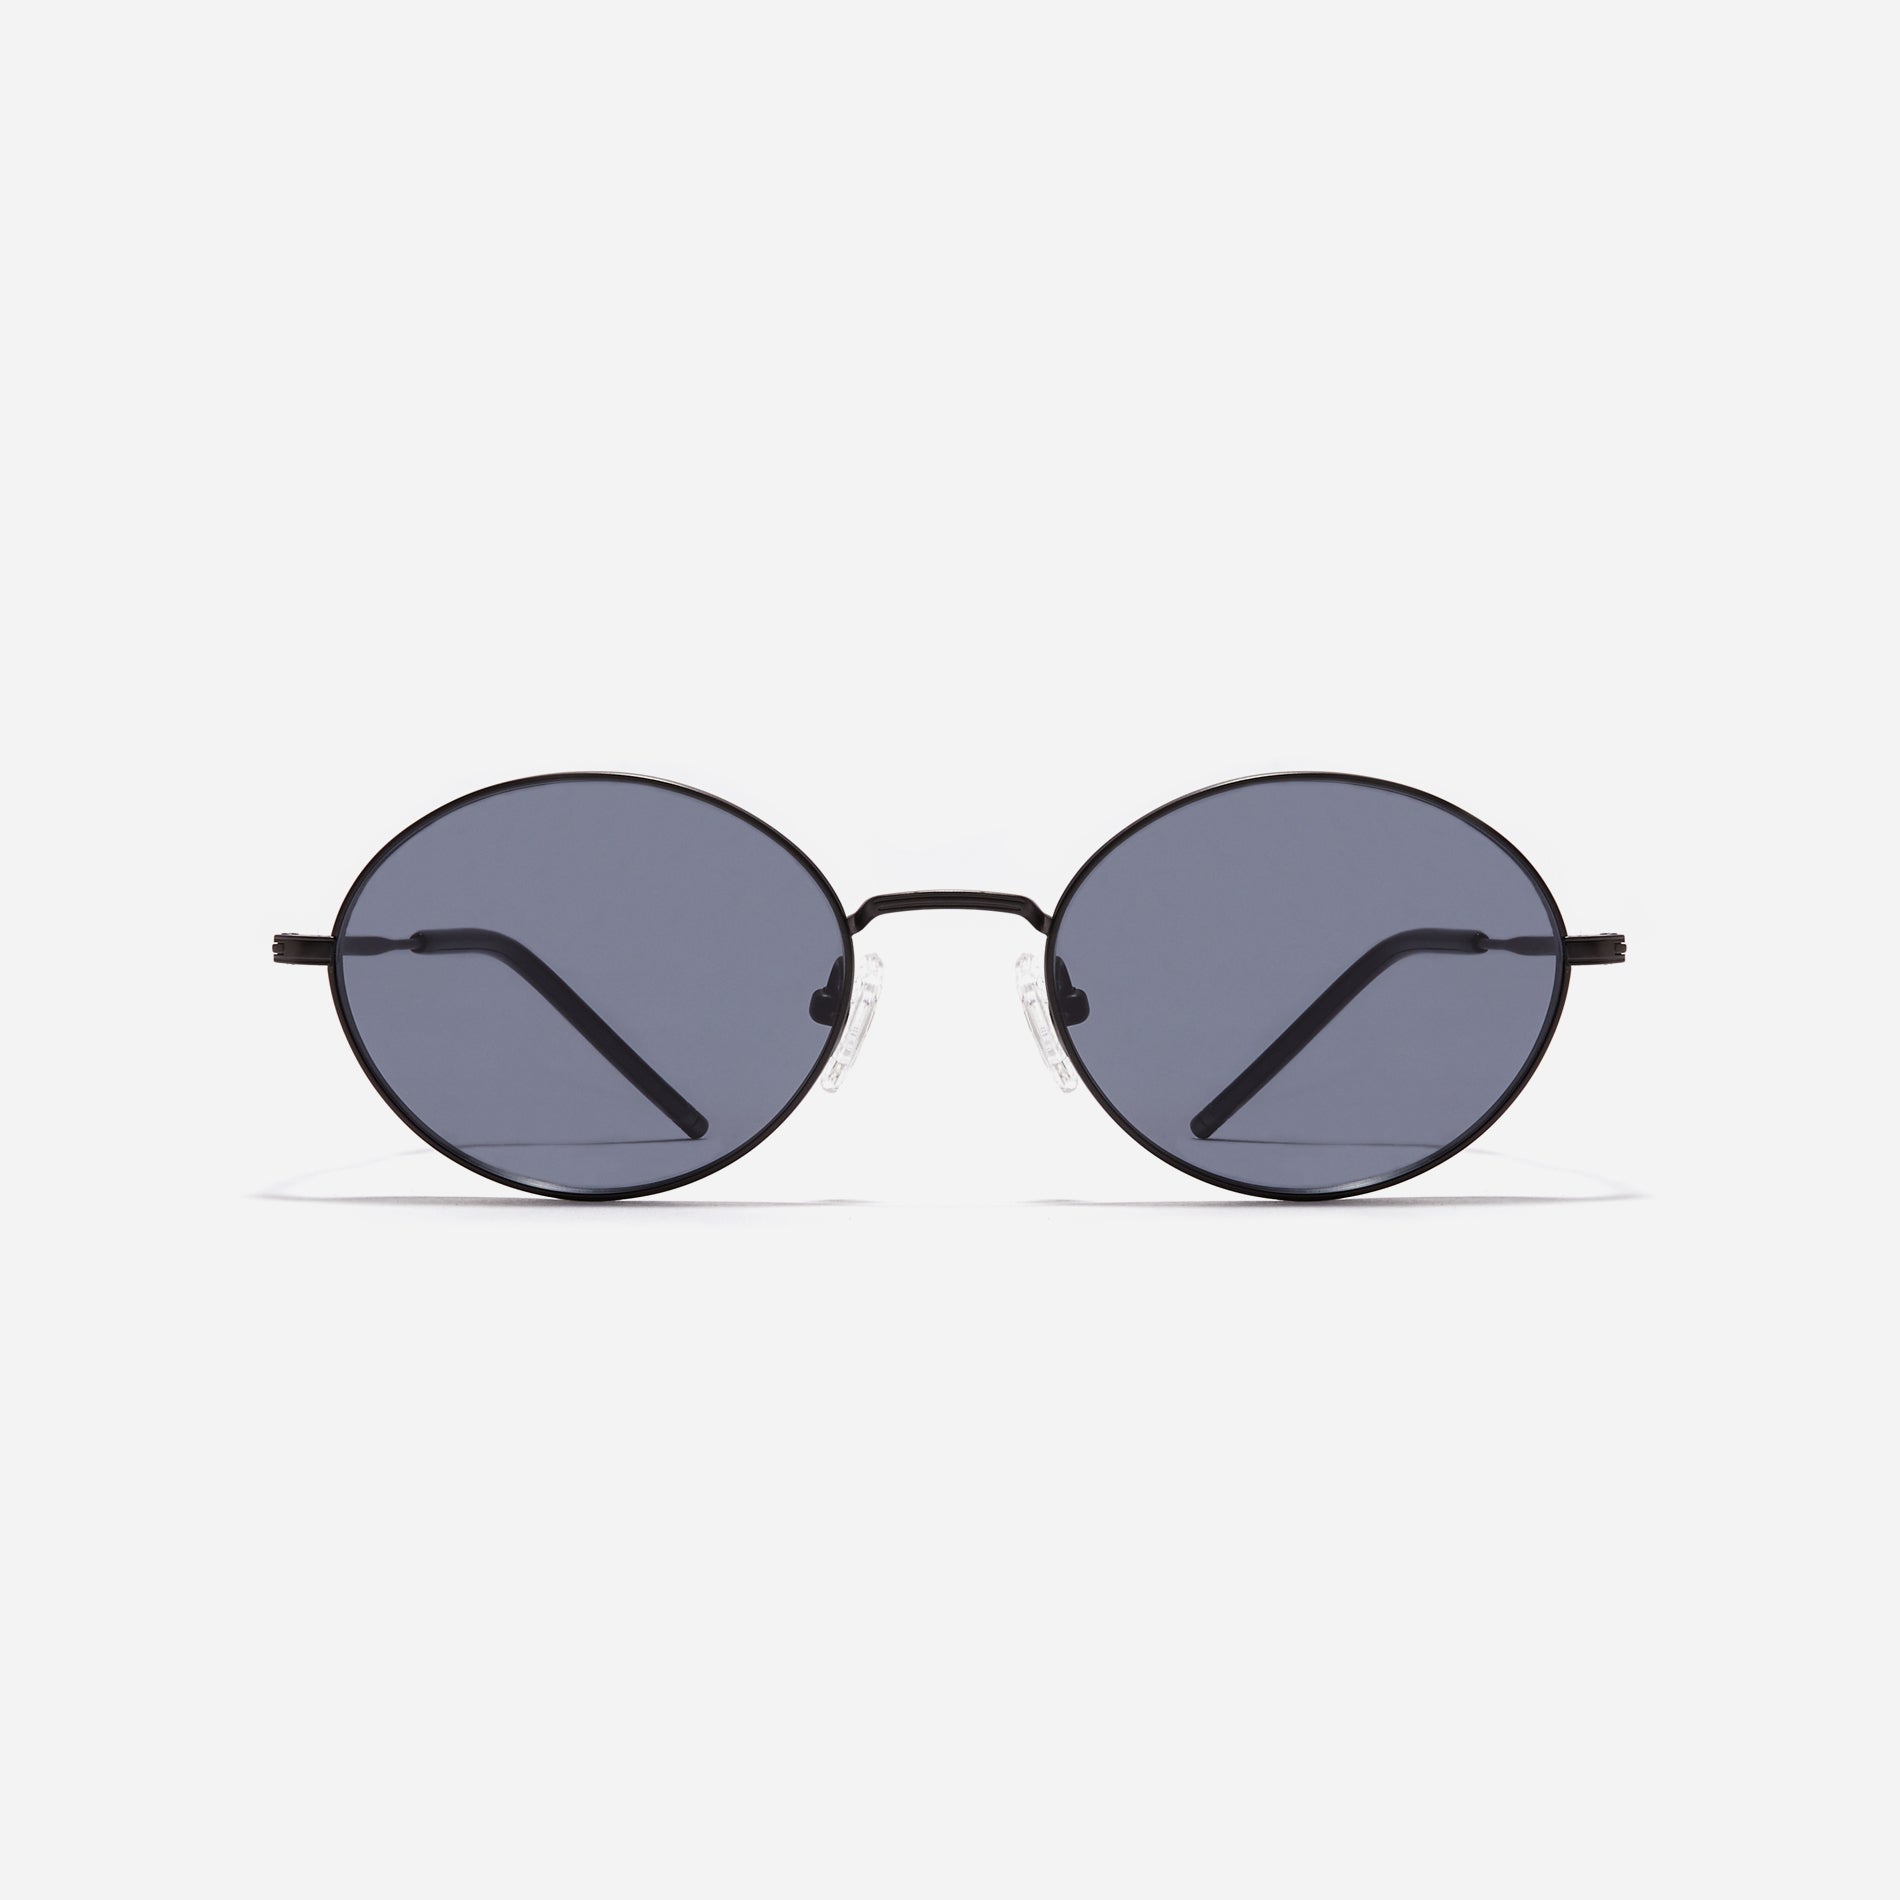 Tinted sunglasses with an oval frame crafted entirely from titanium.